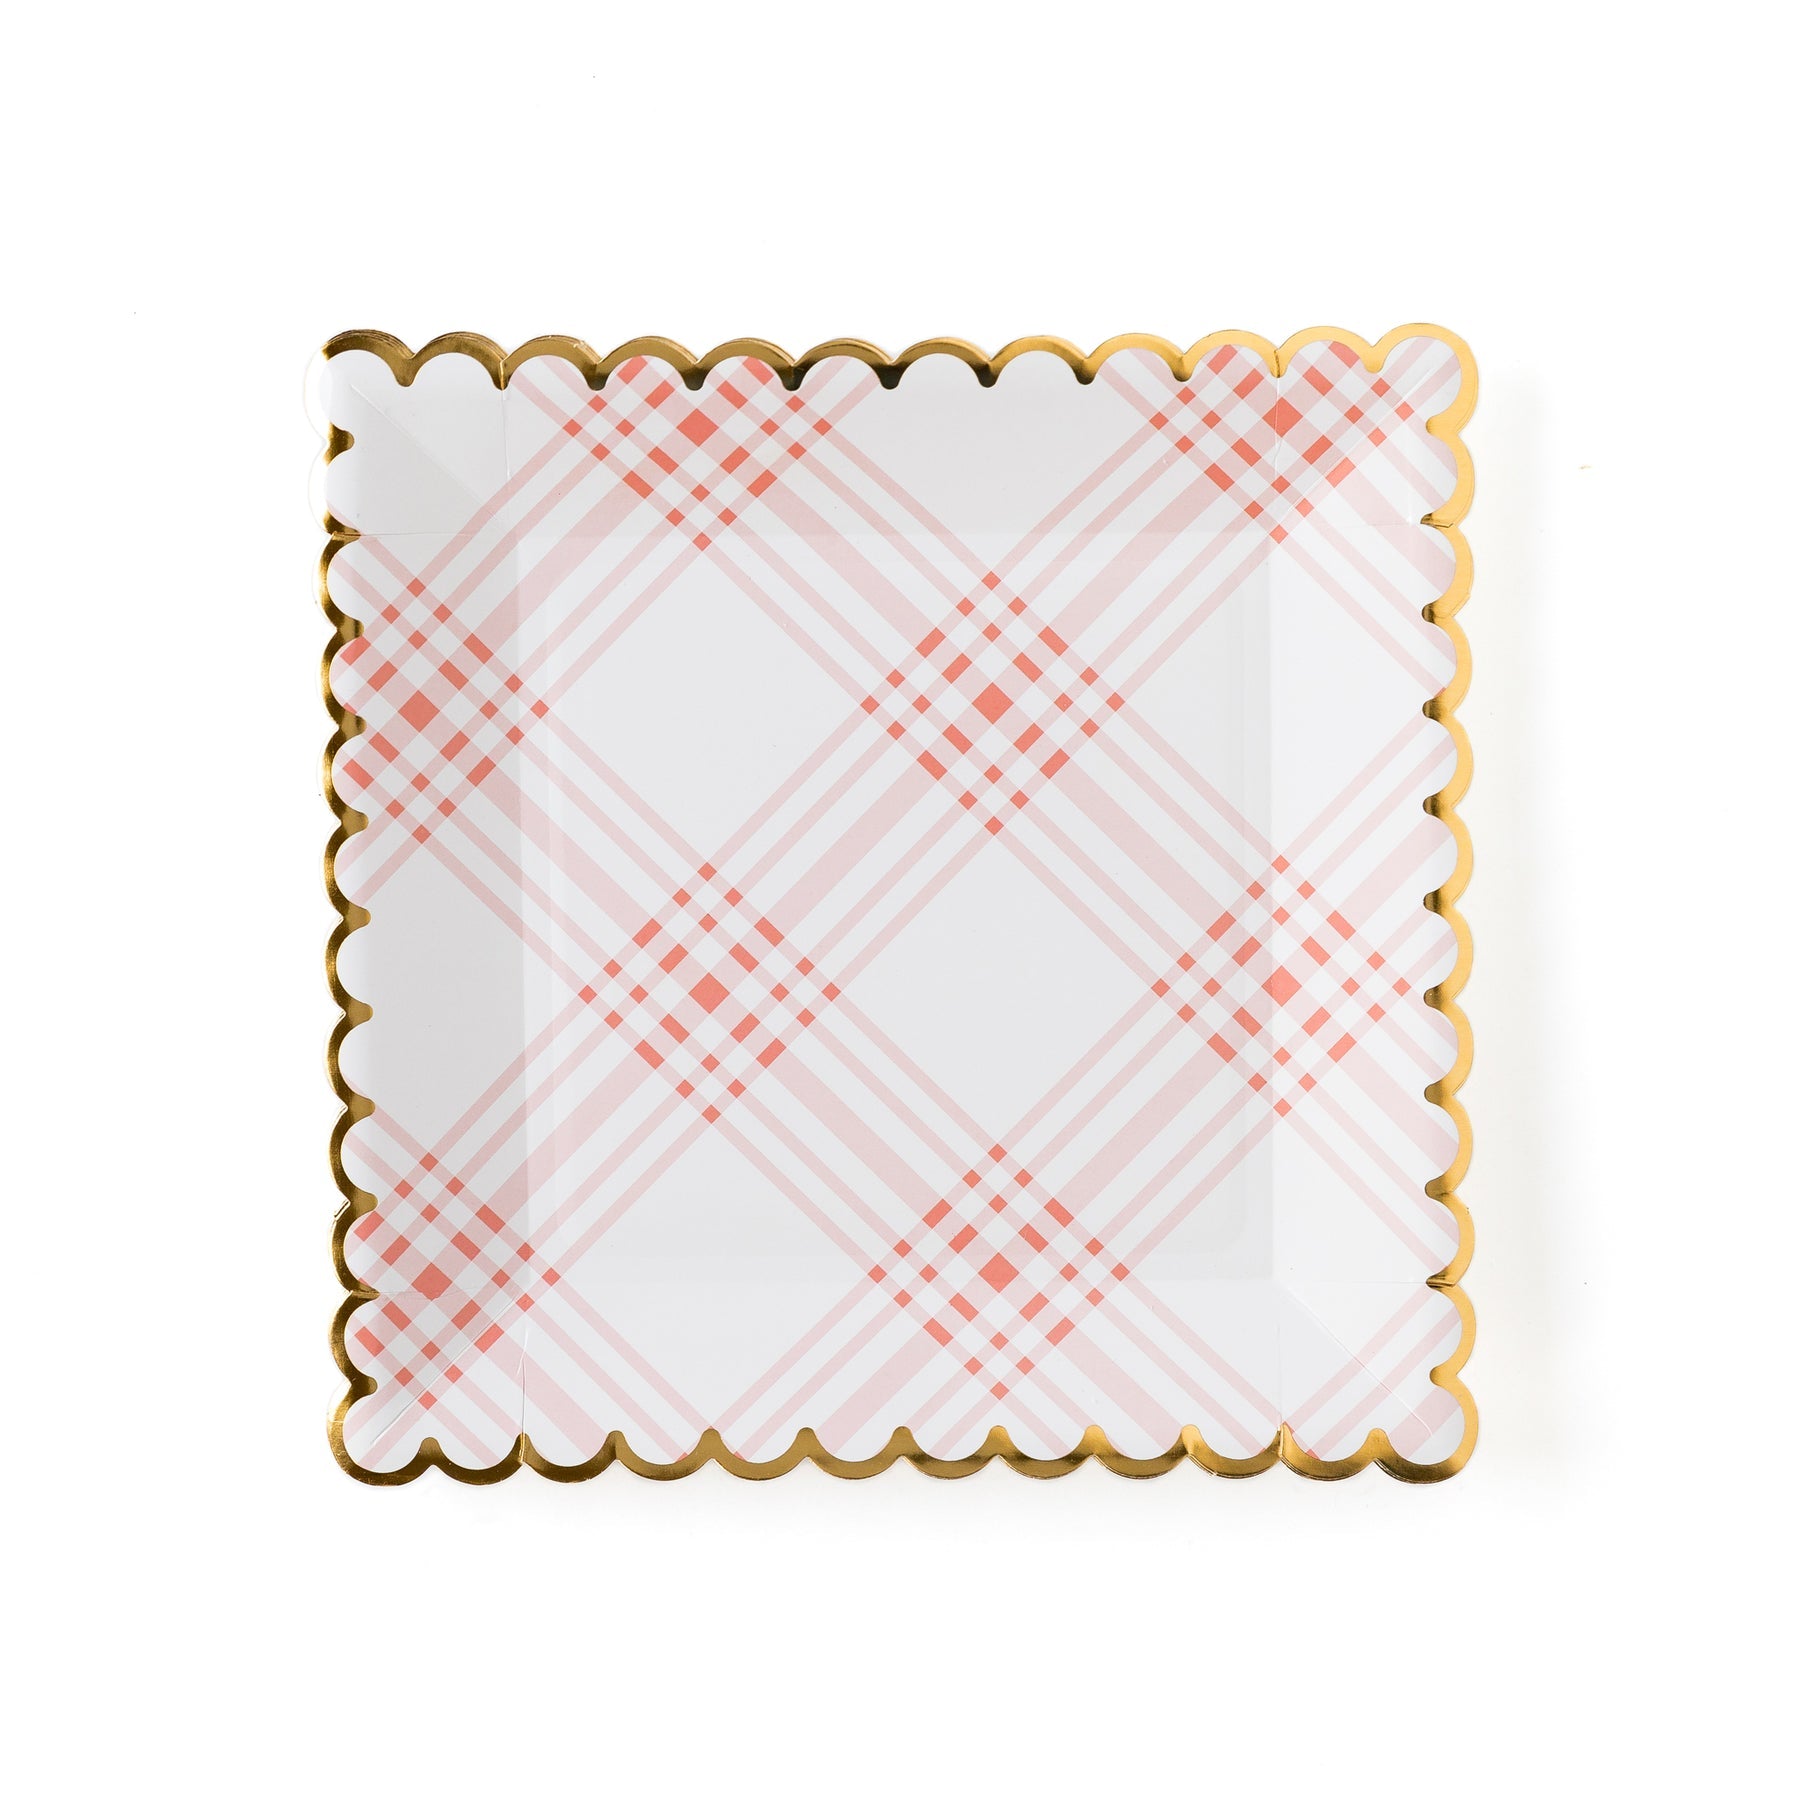 Coral Plaid Garden Party Scalloped Plaid Plate